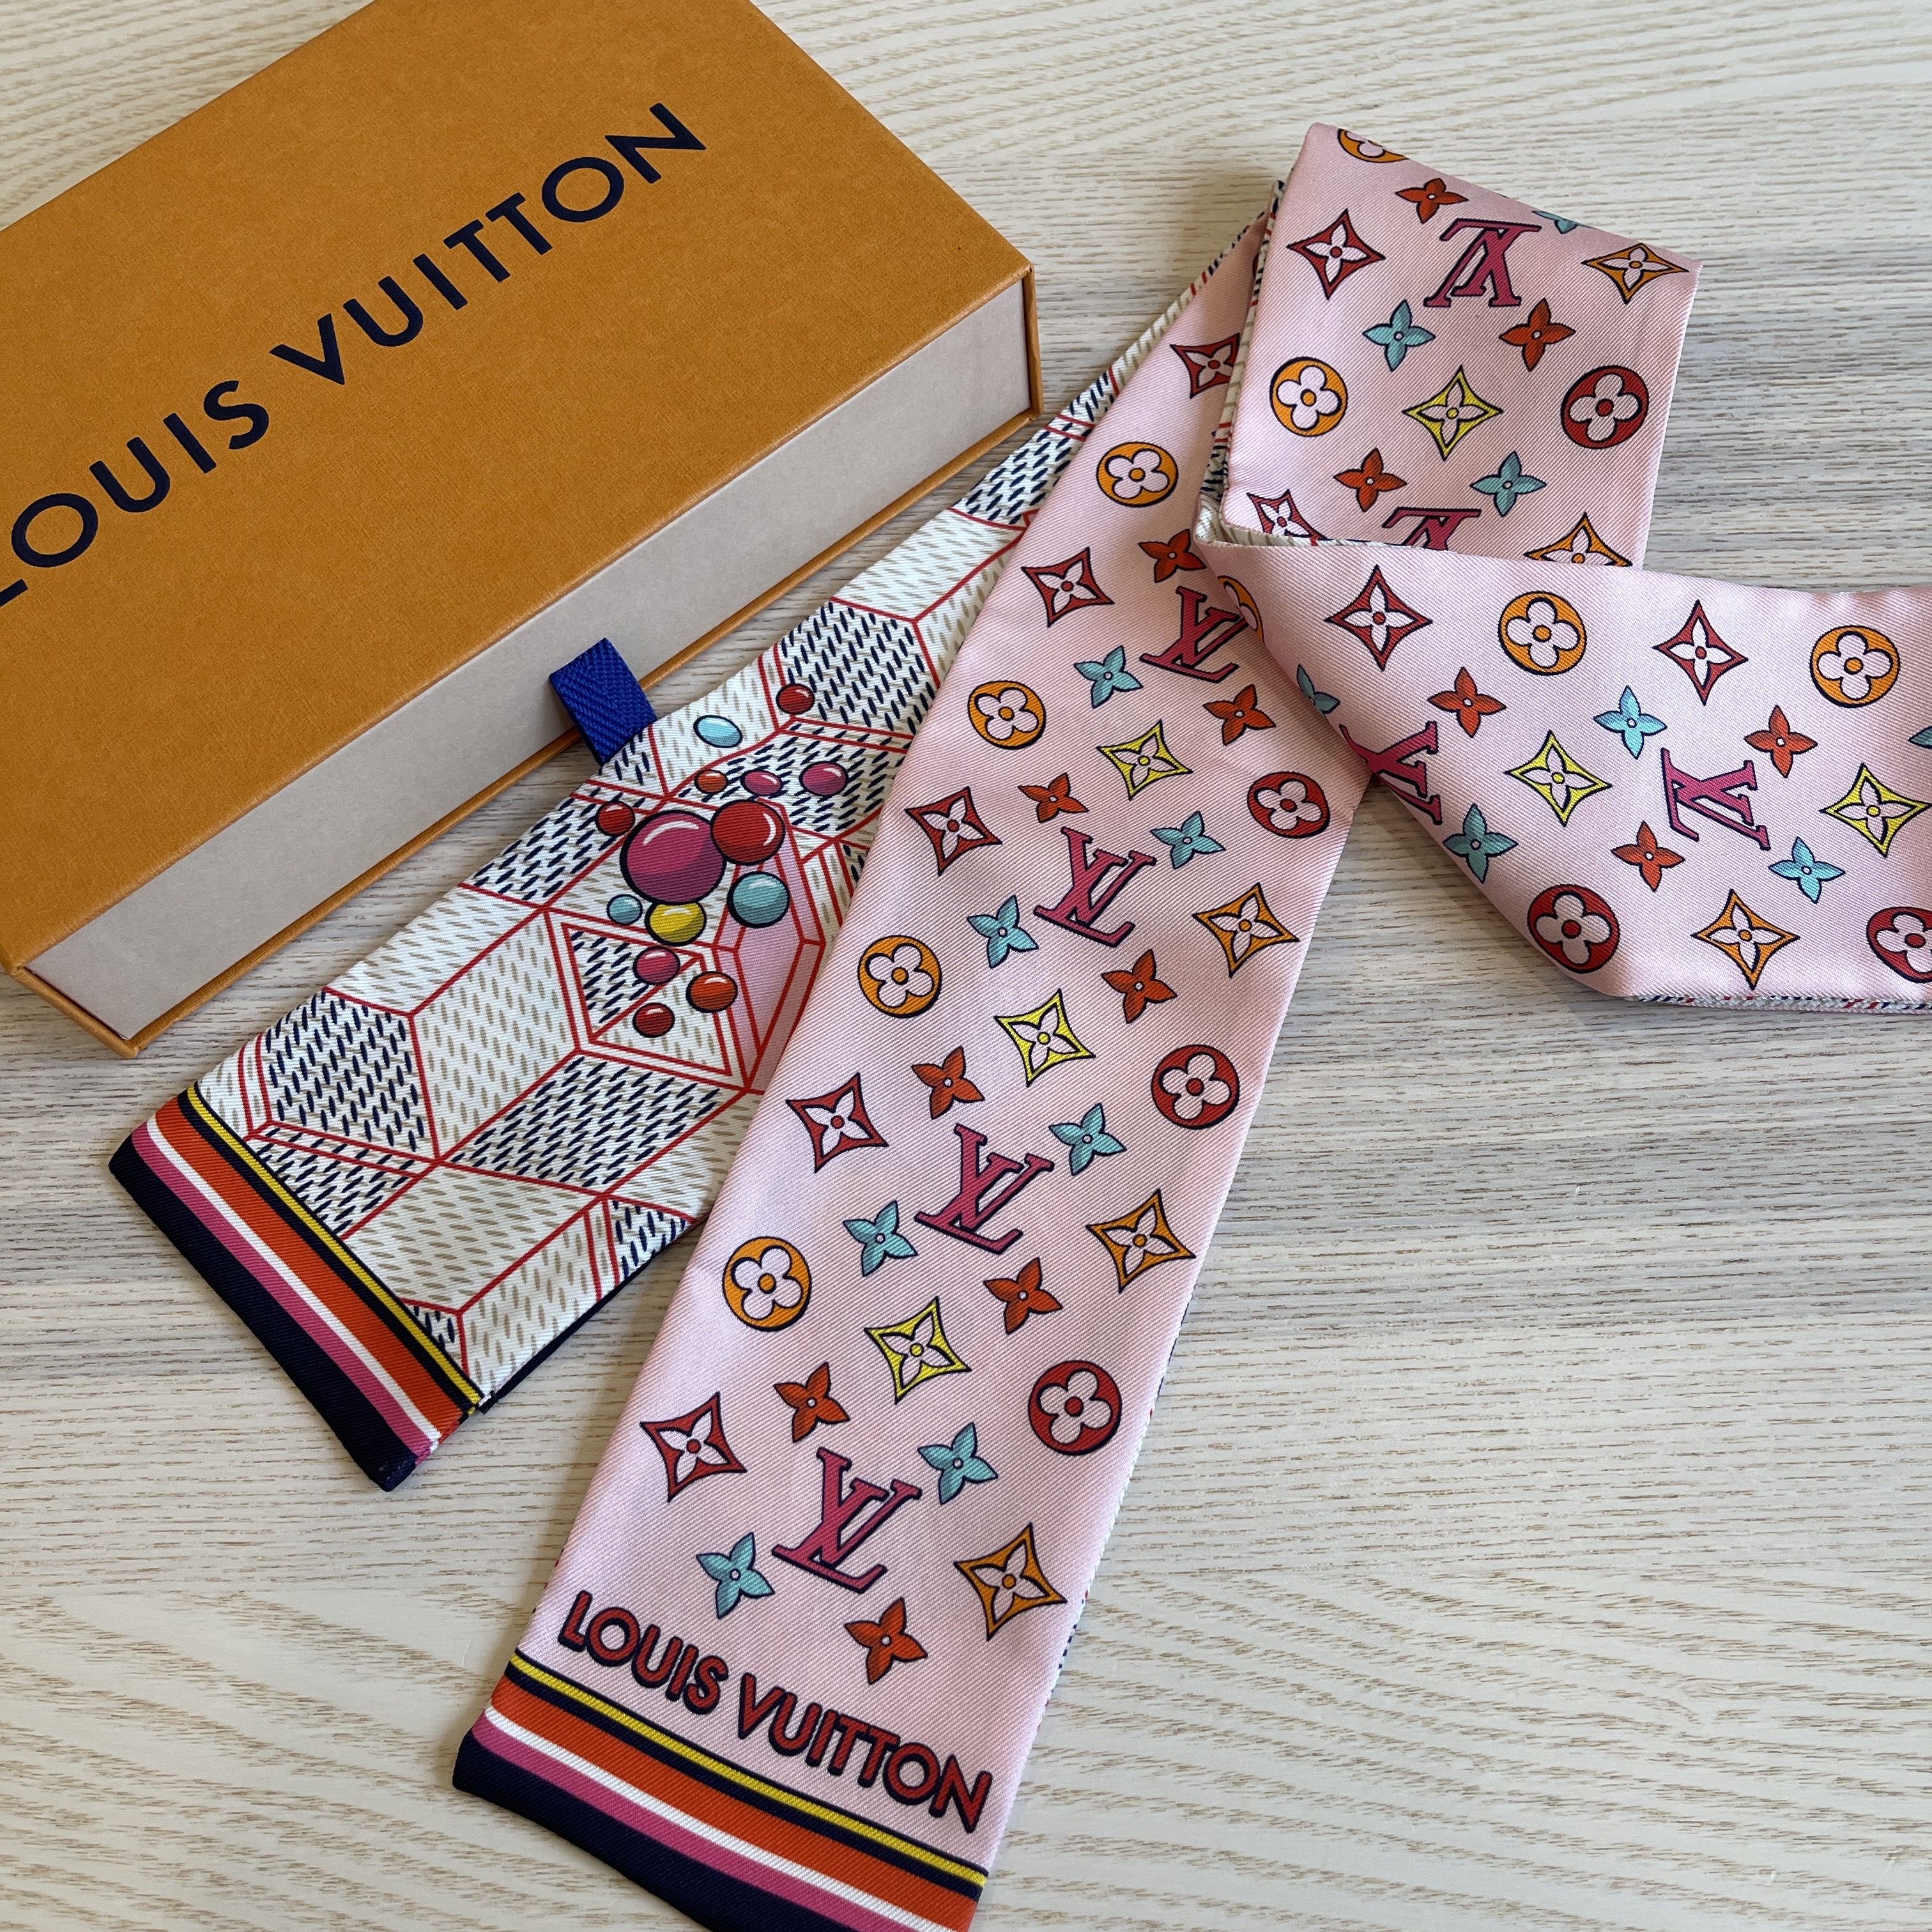 LOUIS VUITTON Bandeau Scarf Pink/Multicolor Silk100%– GALLERY RARE Global  Online Store